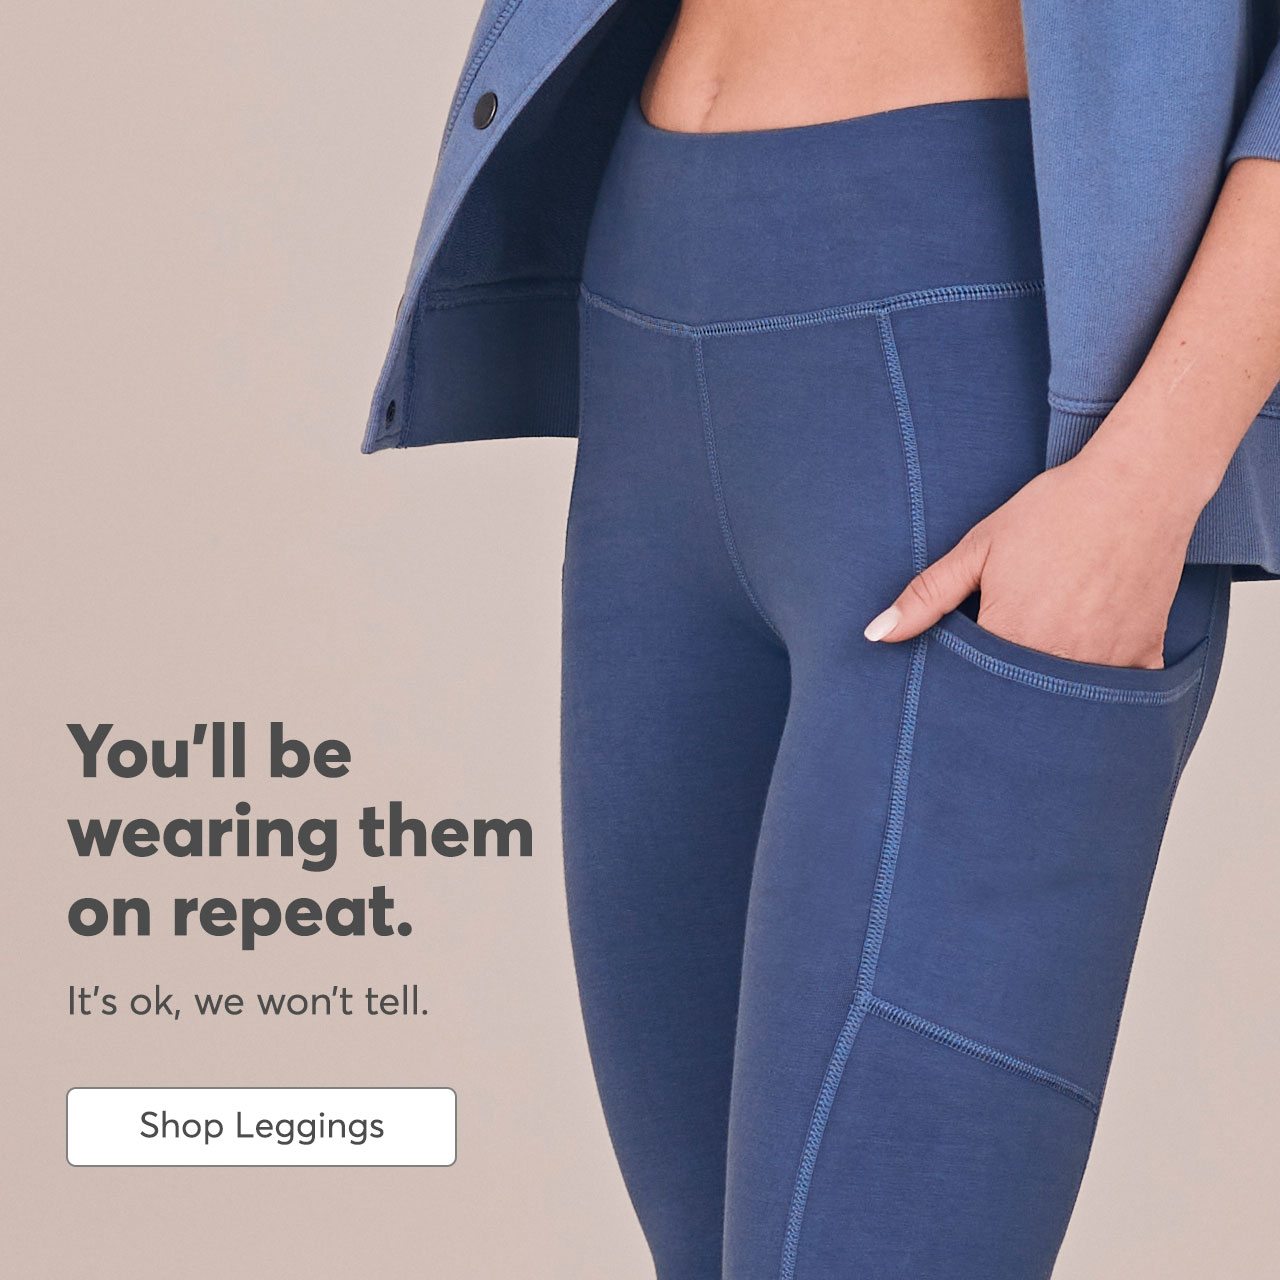 You'll be wearing them on repeat. It's ok, we won't tell. Shop Leggings